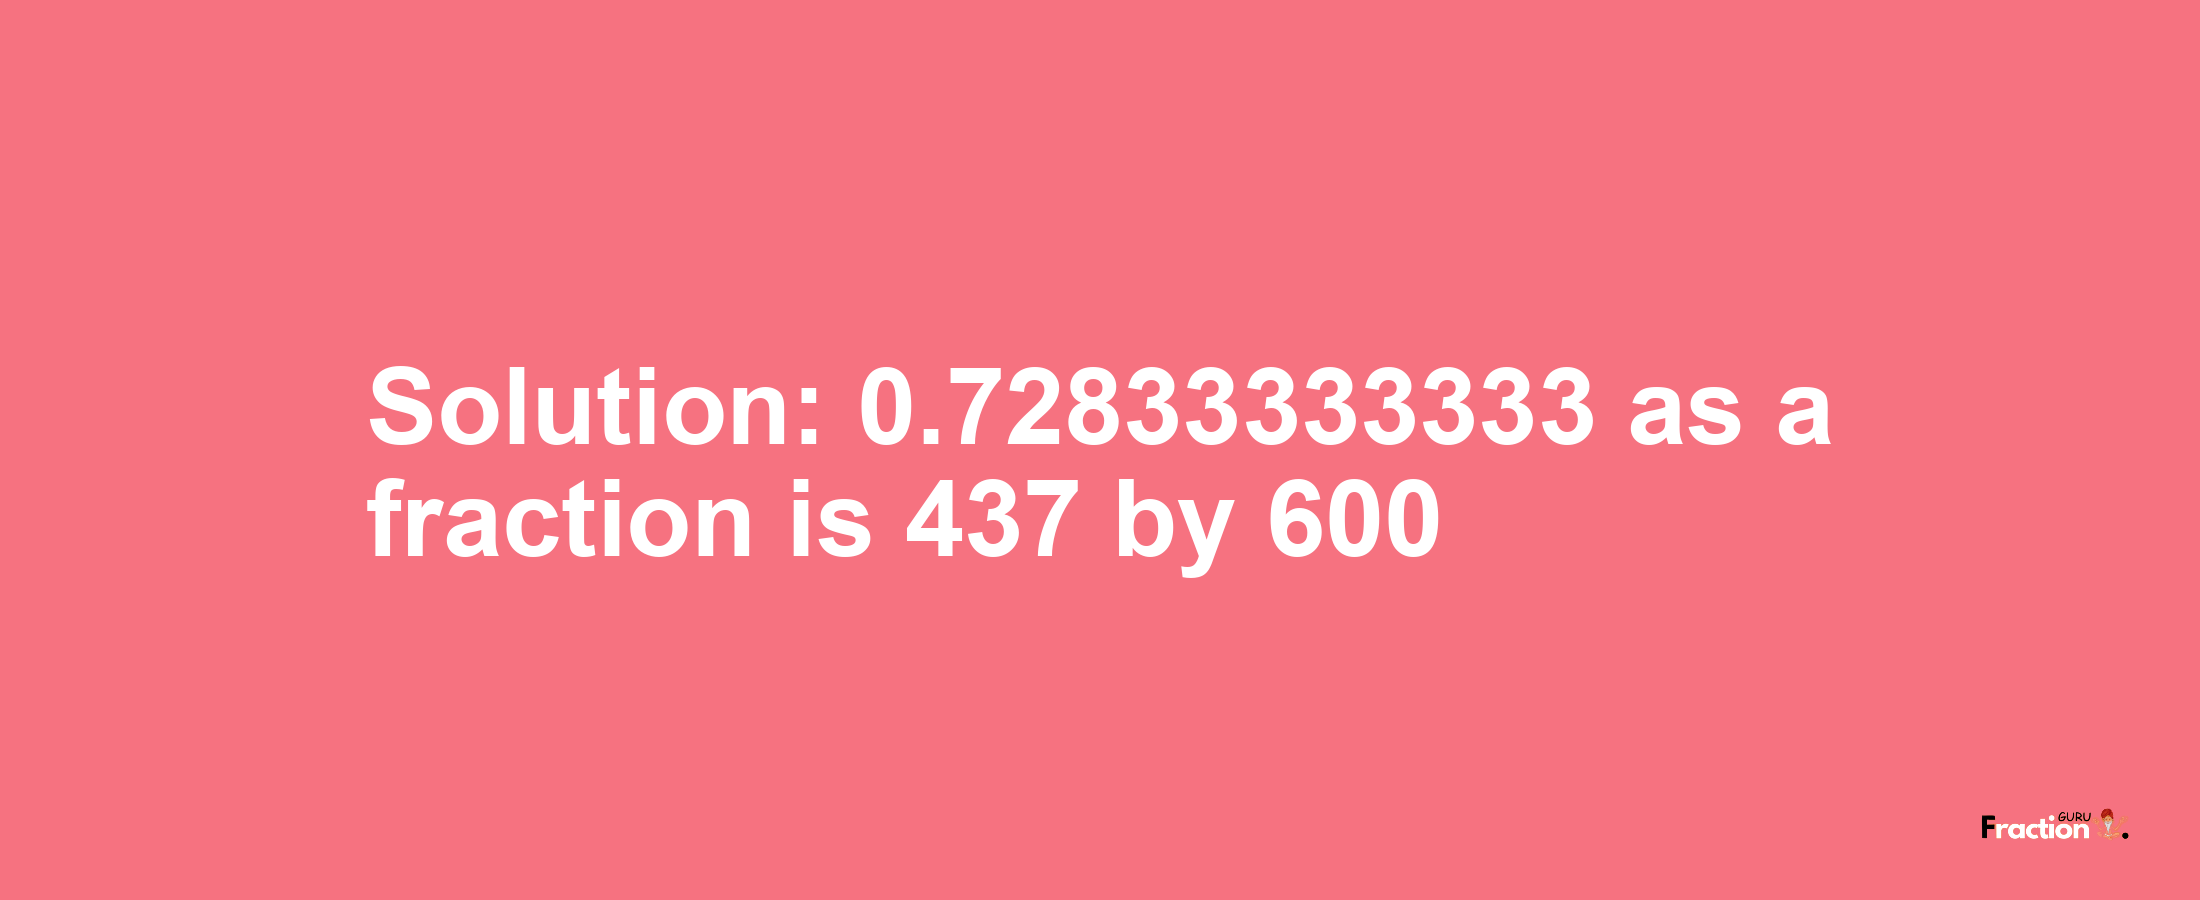 Solution:0.72833333333 as a fraction is 437/600